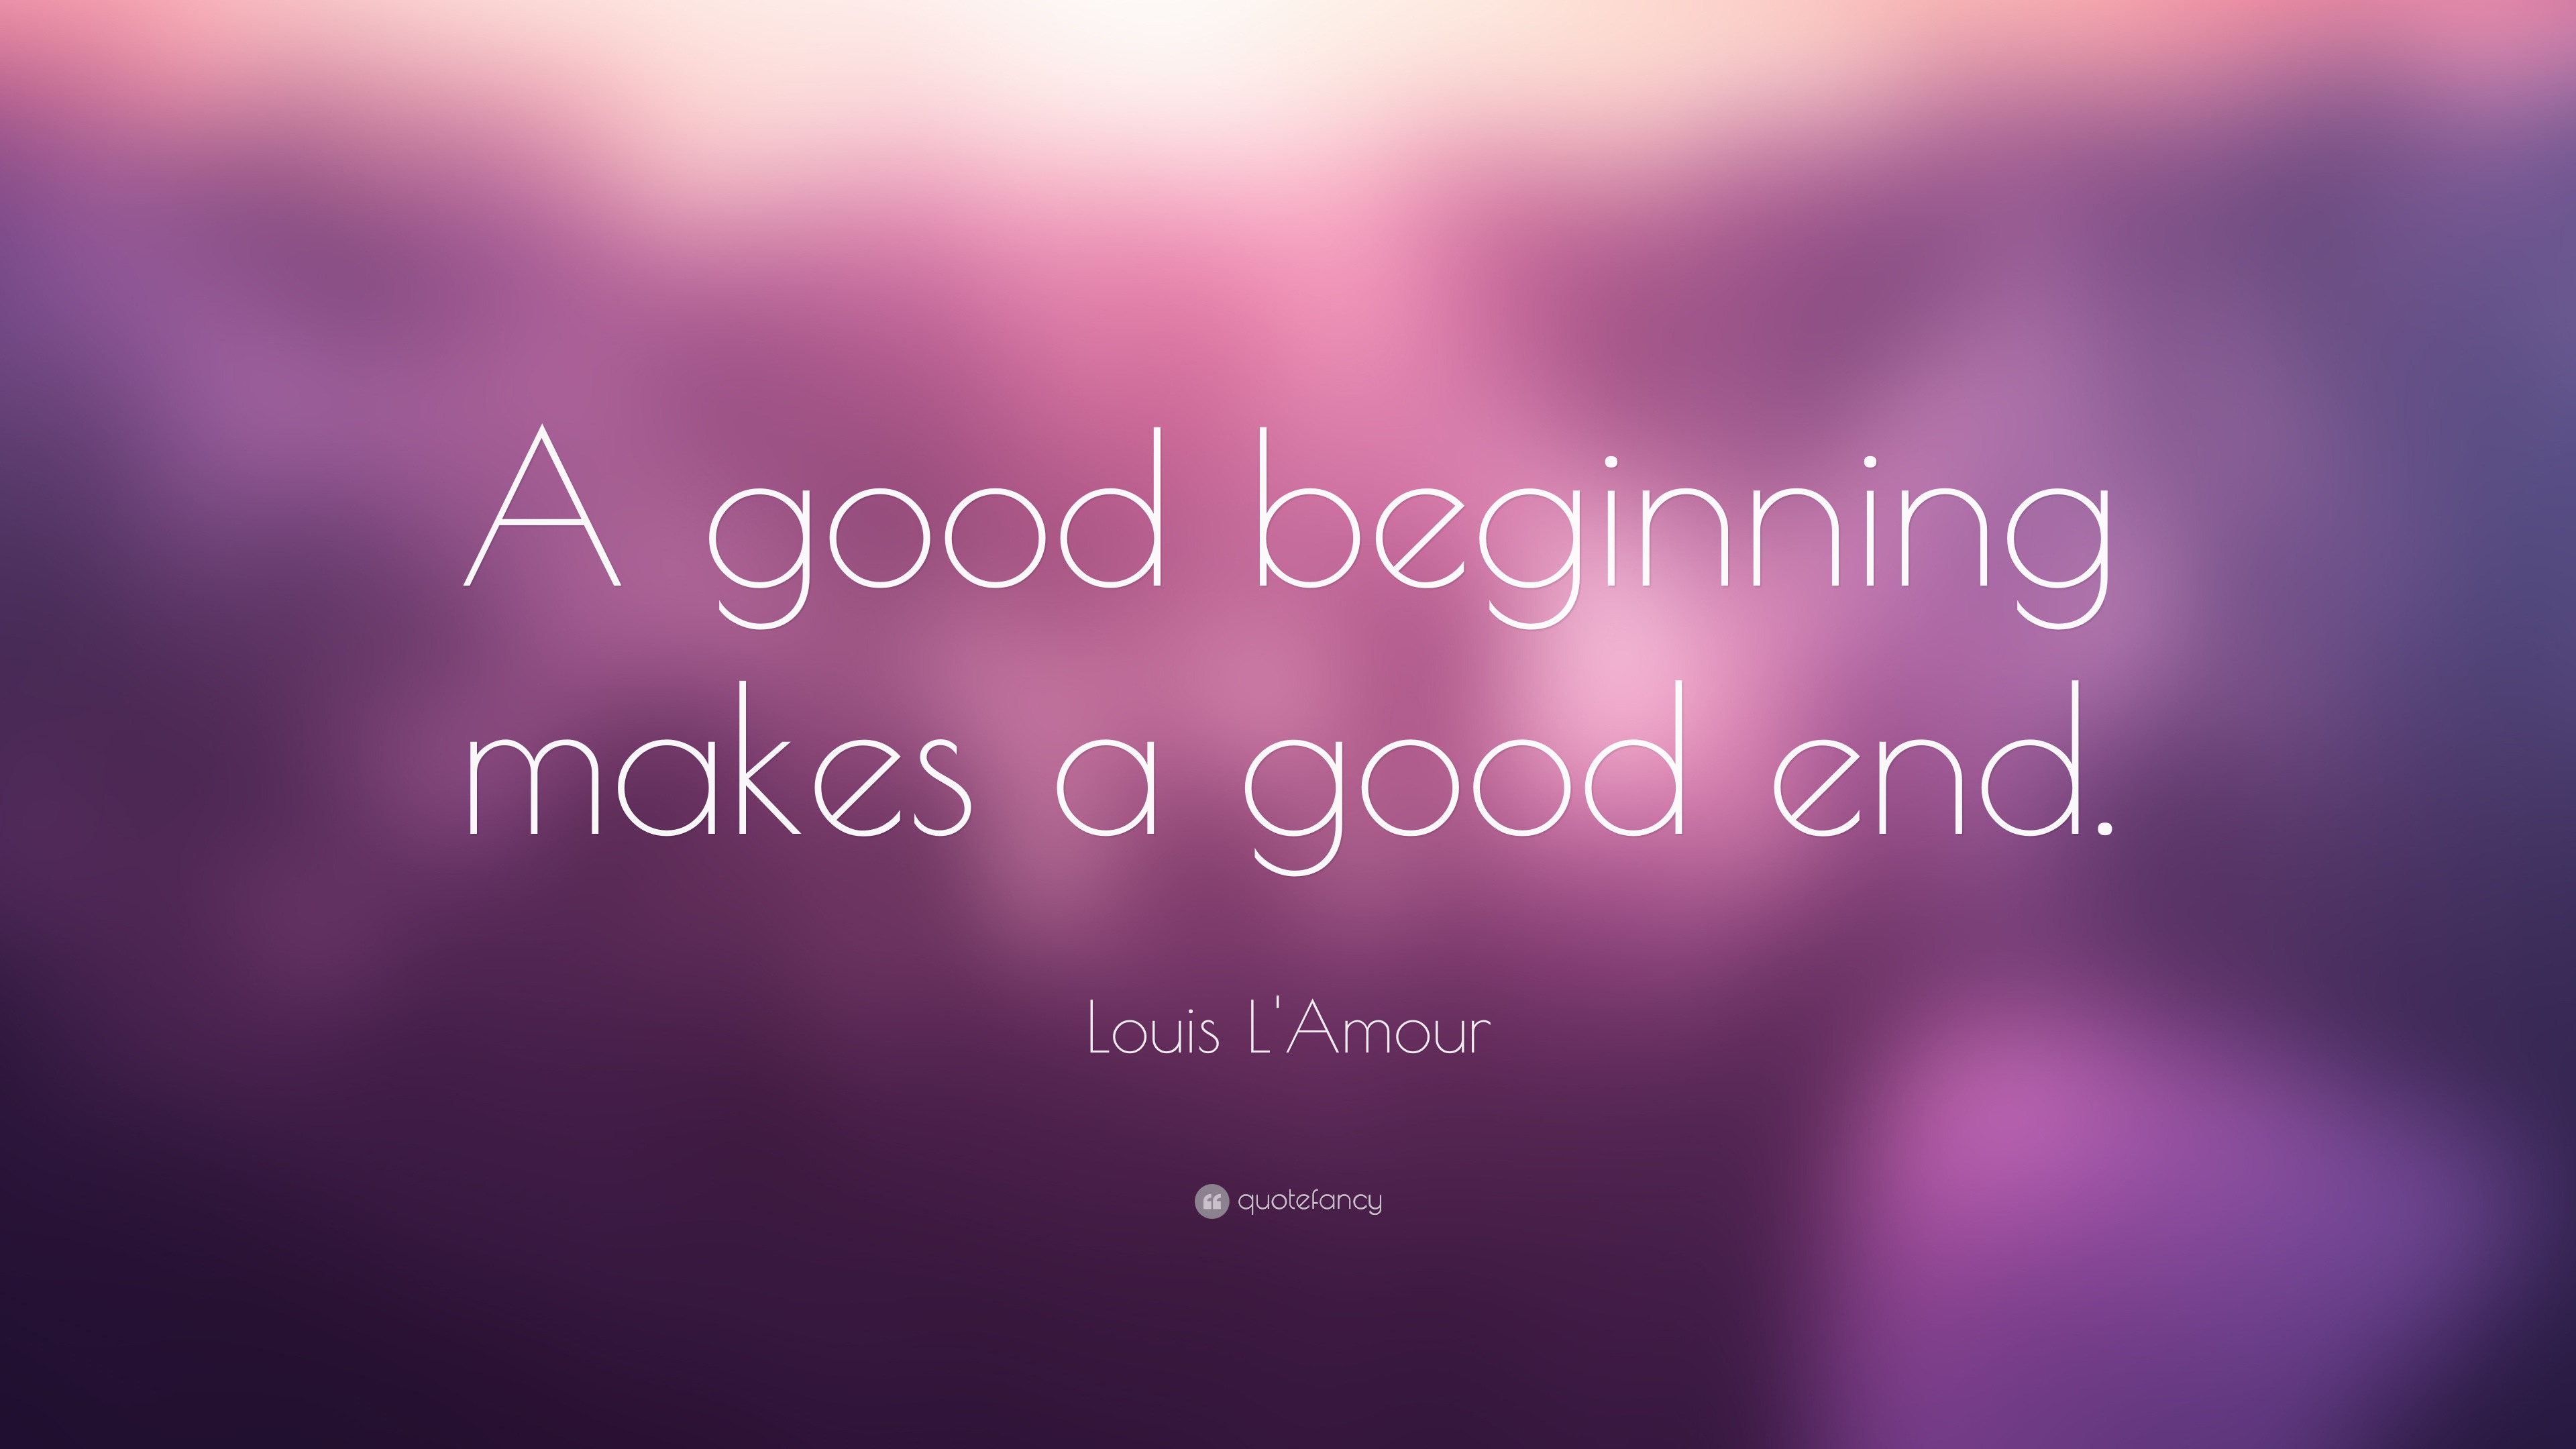 Louis L&#39;Amour Quote: “A good beginning makes a good end.” (12 wallpapers) - Quotefancy